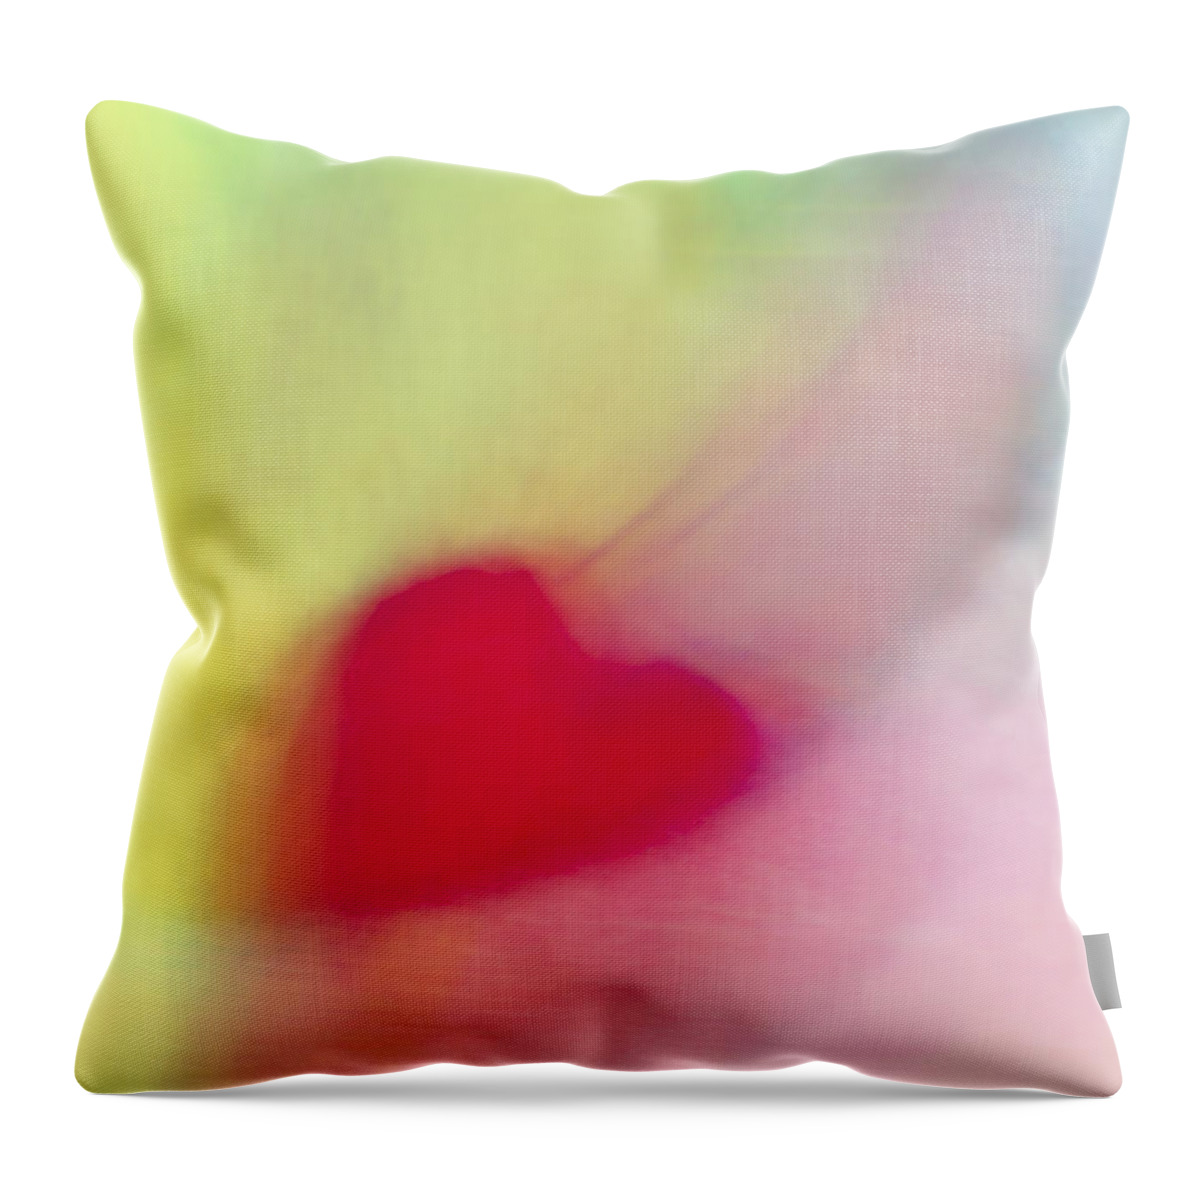 Hearts Throw Pillow featuring the digital art Flying Red Heart by Susan Stone